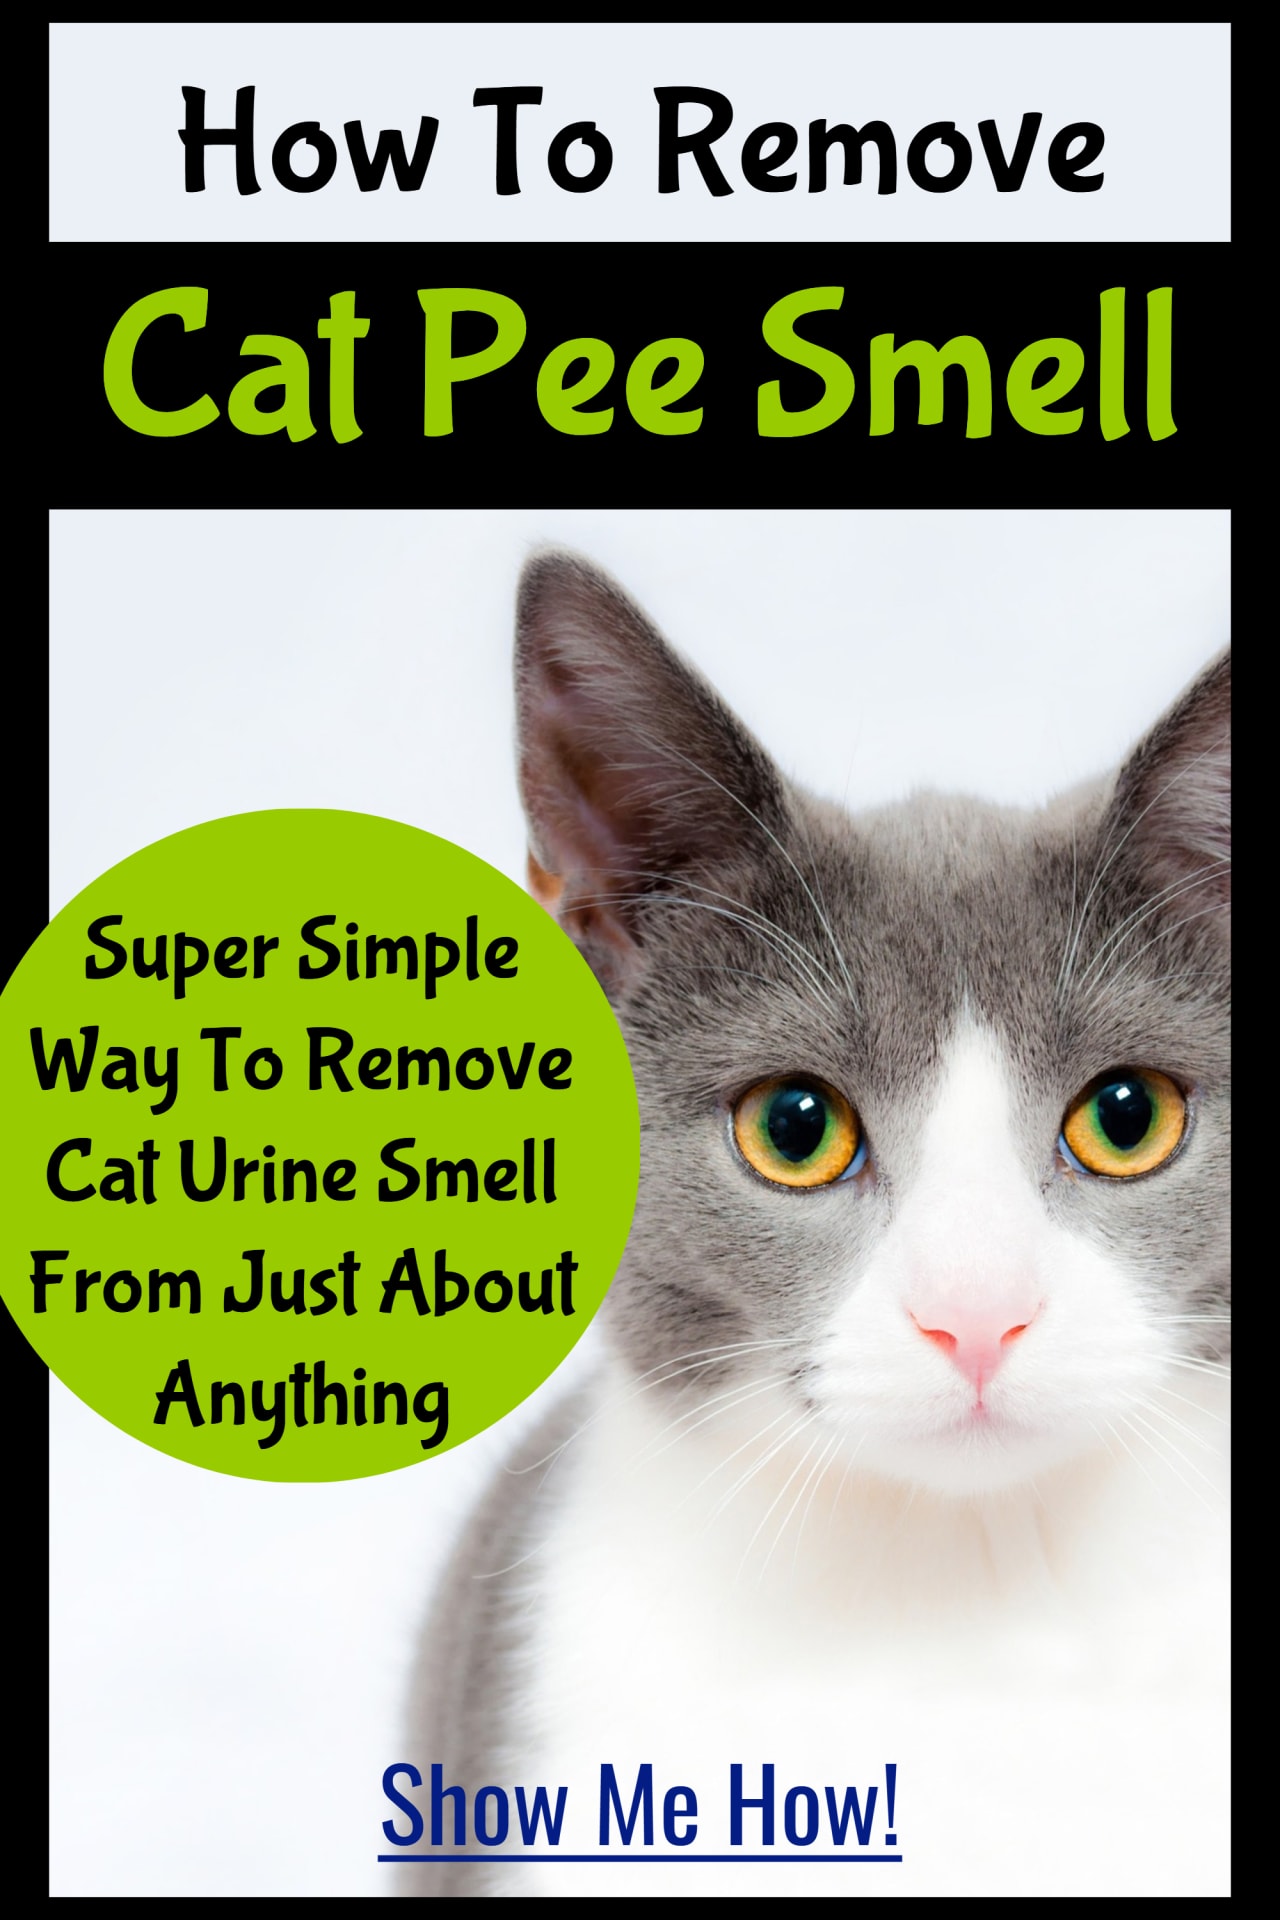 Cat Pee SMELL!  How to remove cat pee smell from carpet, clothes, fabrics, flooring - eliminate cat urine smell from everything - easy DIY cat pee smell remover